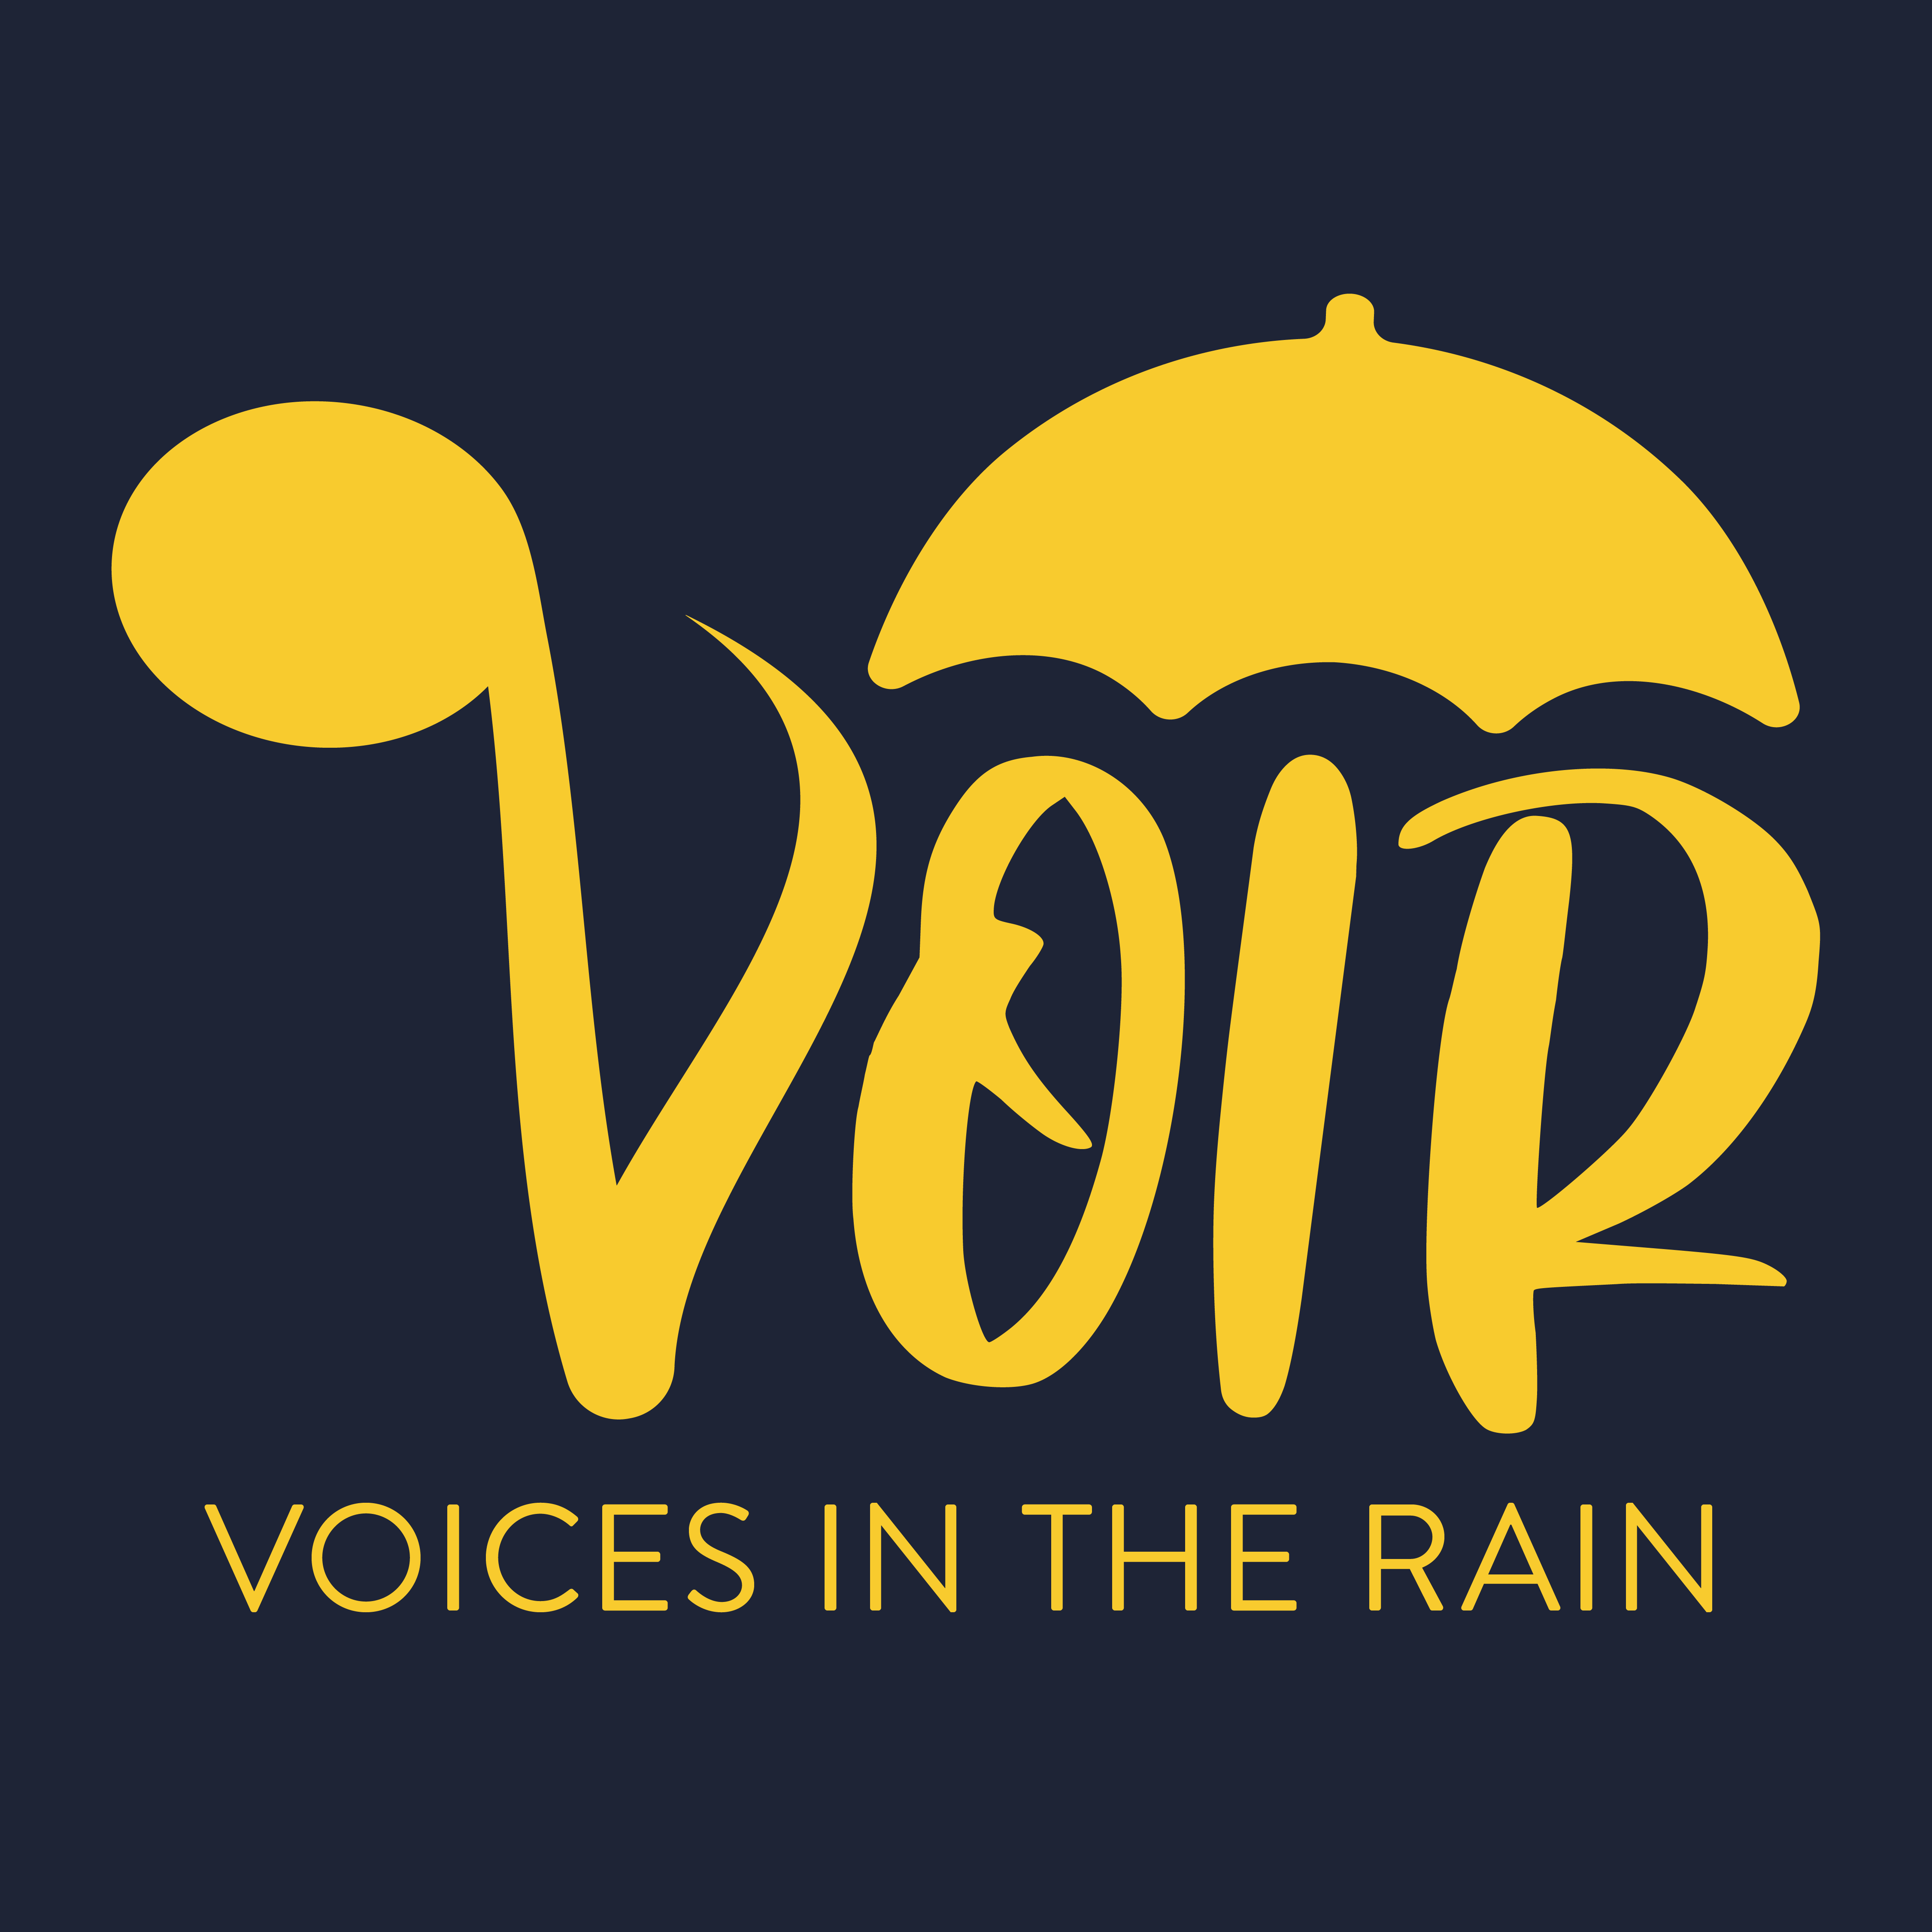 Voices in the Rain @ Bukit Timah